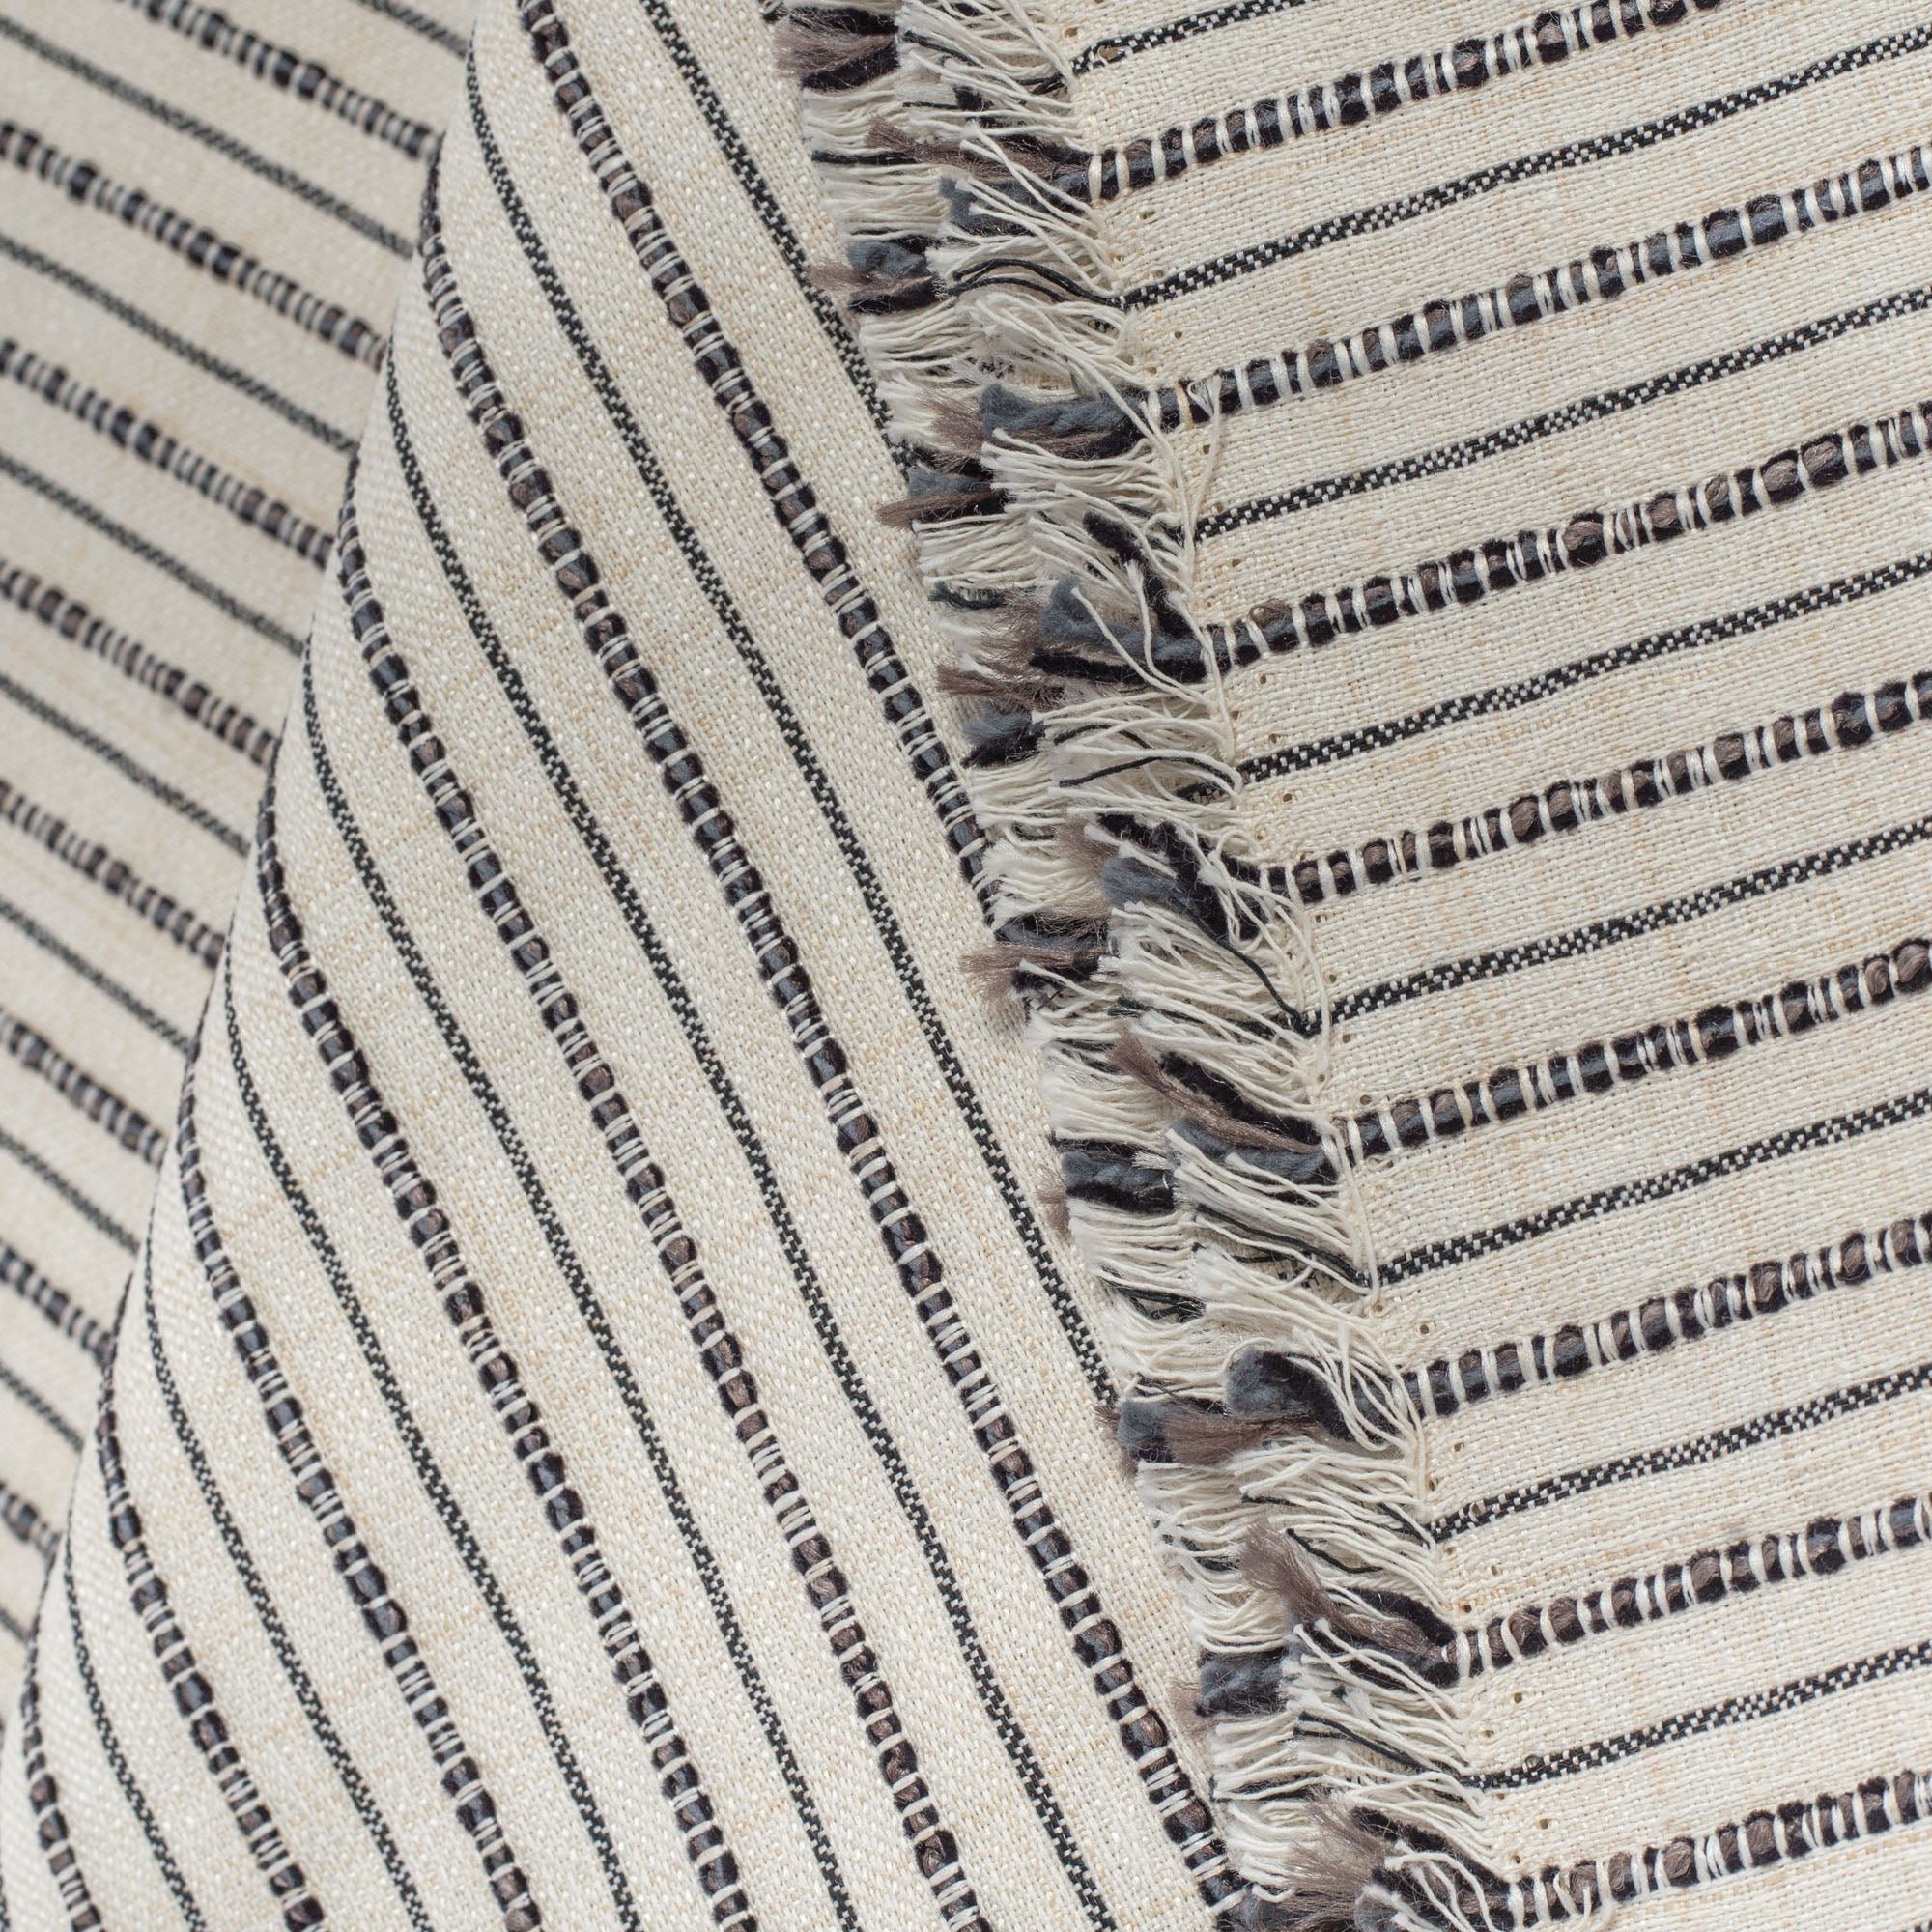 Misto Stripe cream and black, a cream and black striped Crypton home performance fabric : detail view